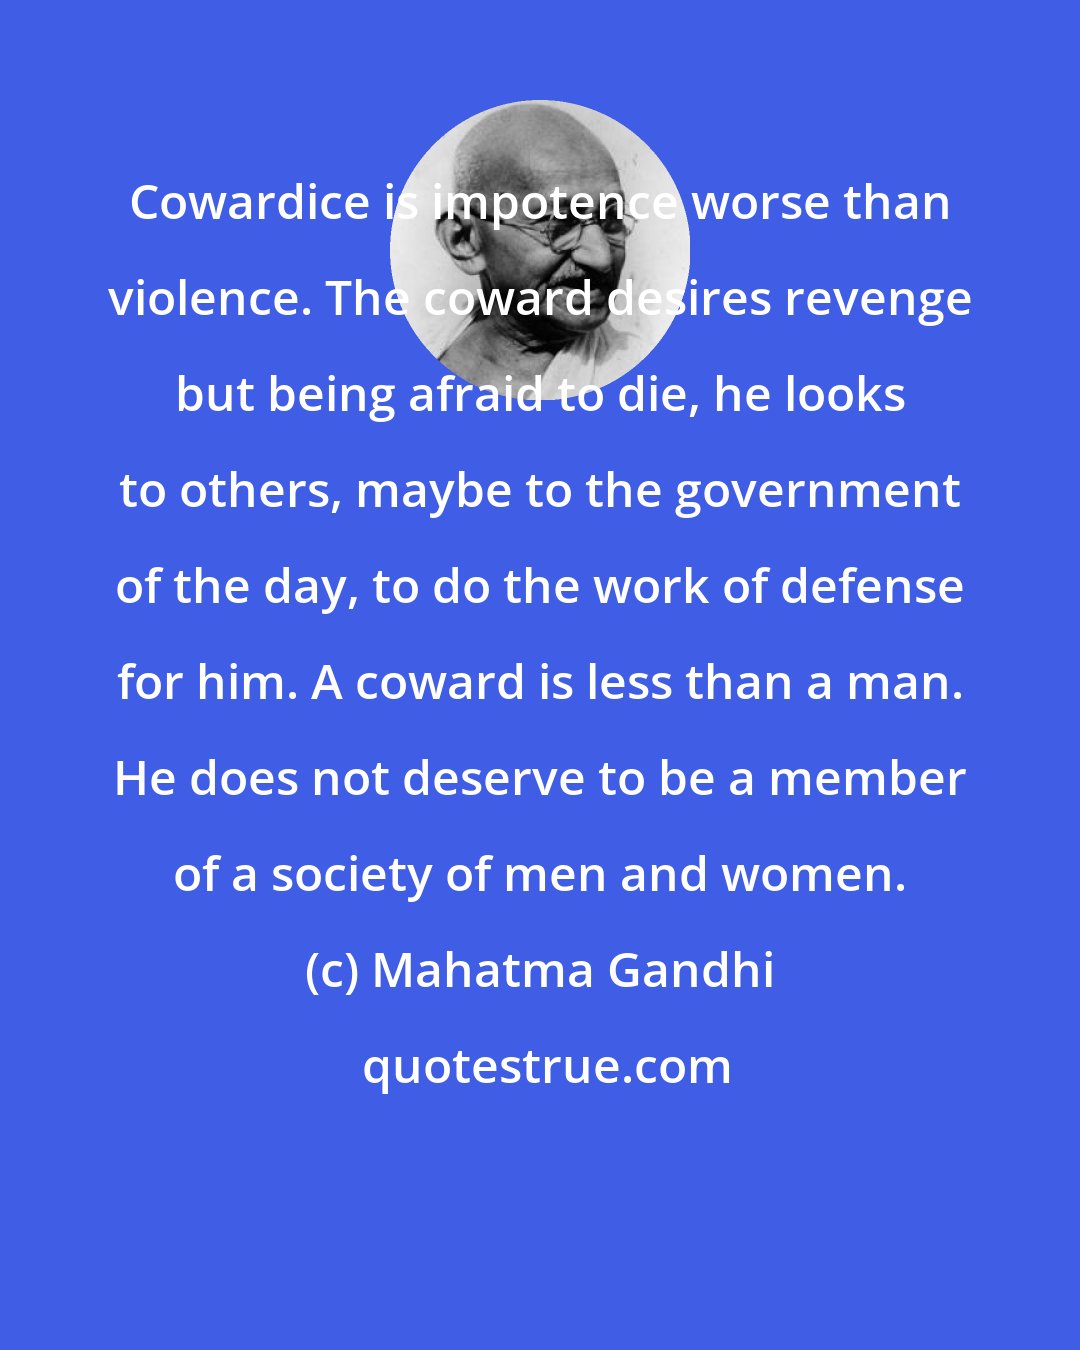 Mahatma Gandhi: Cowardice is impotence worse than violence. The coward desires revenge but being afraid to die, he looks to others, maybe to the government of the day, to do the work of defense for him. A coward is less than a man. He does not deserve to be a member of a society of men and women.